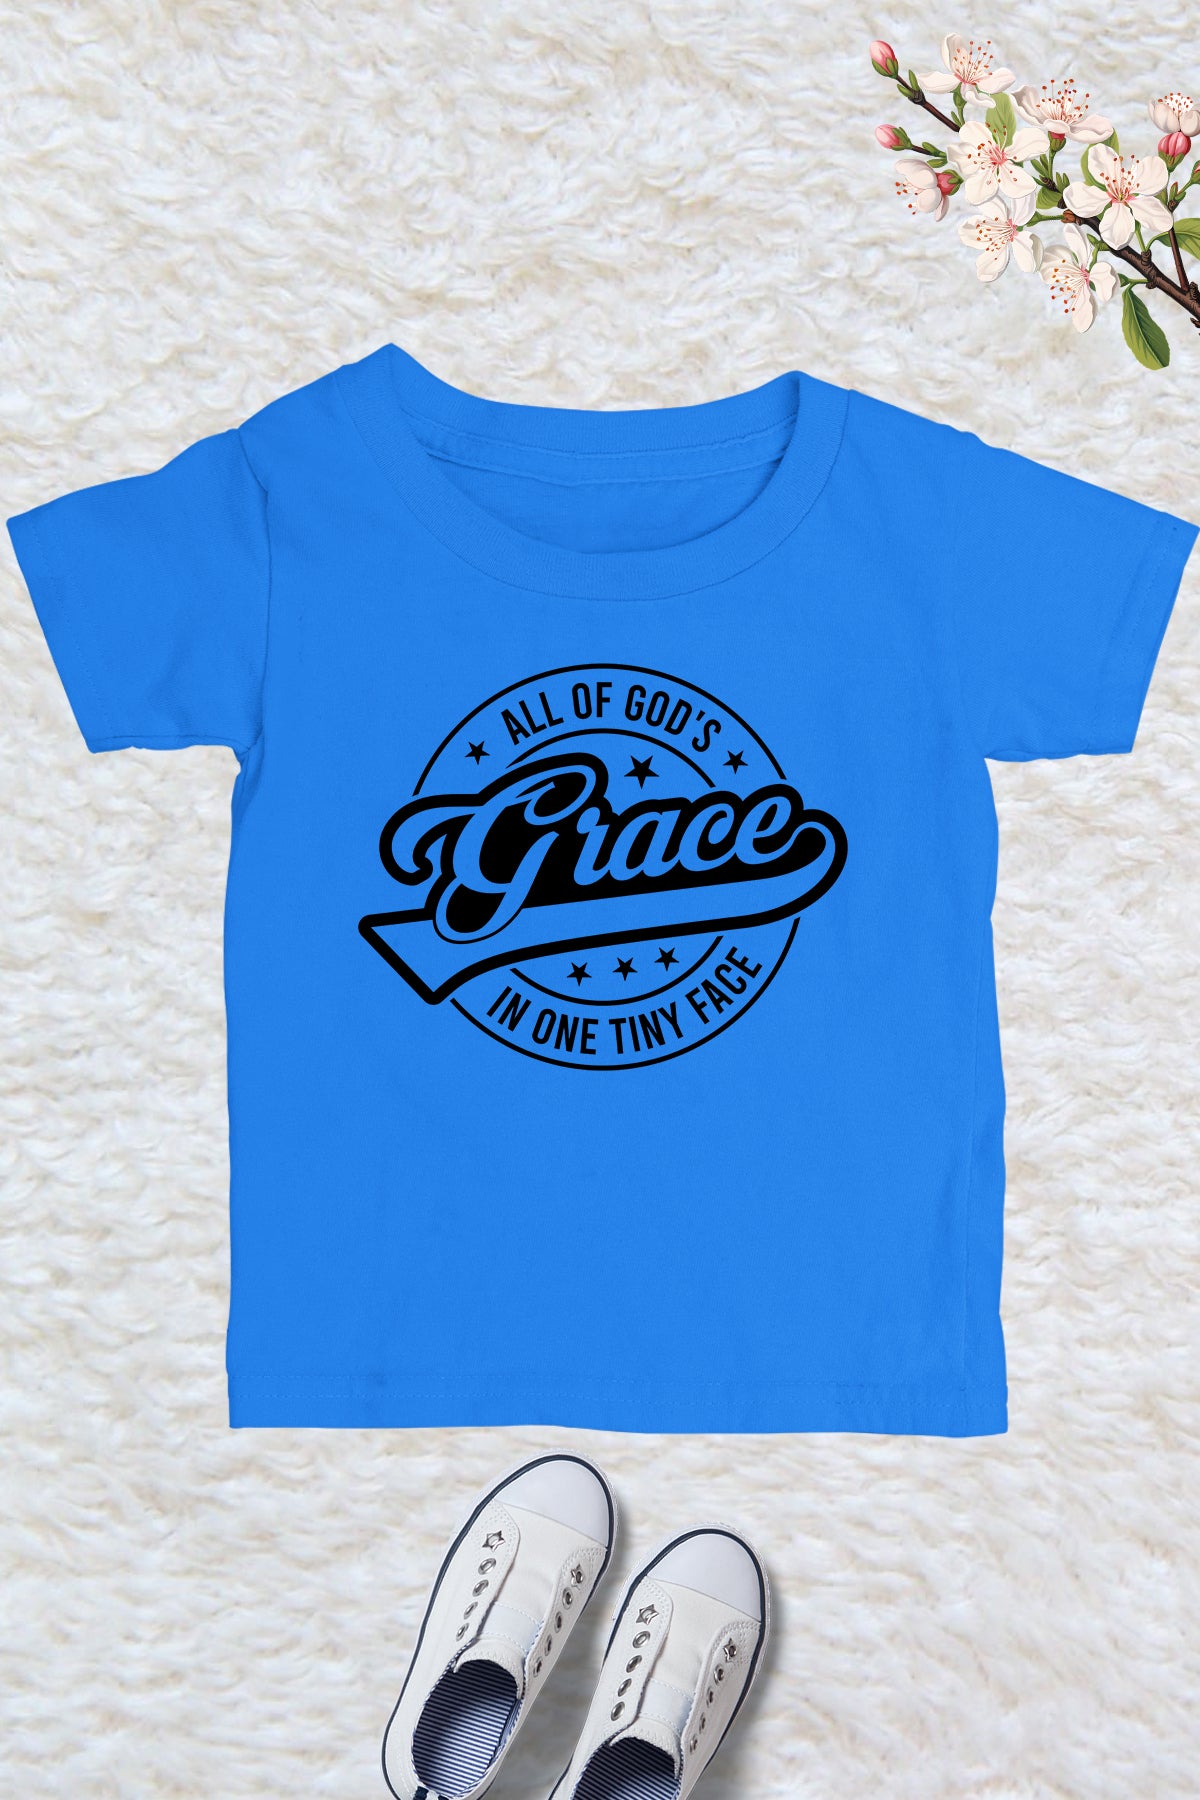 All of Dad's Grace In One Tiny Face Kids T Shirt